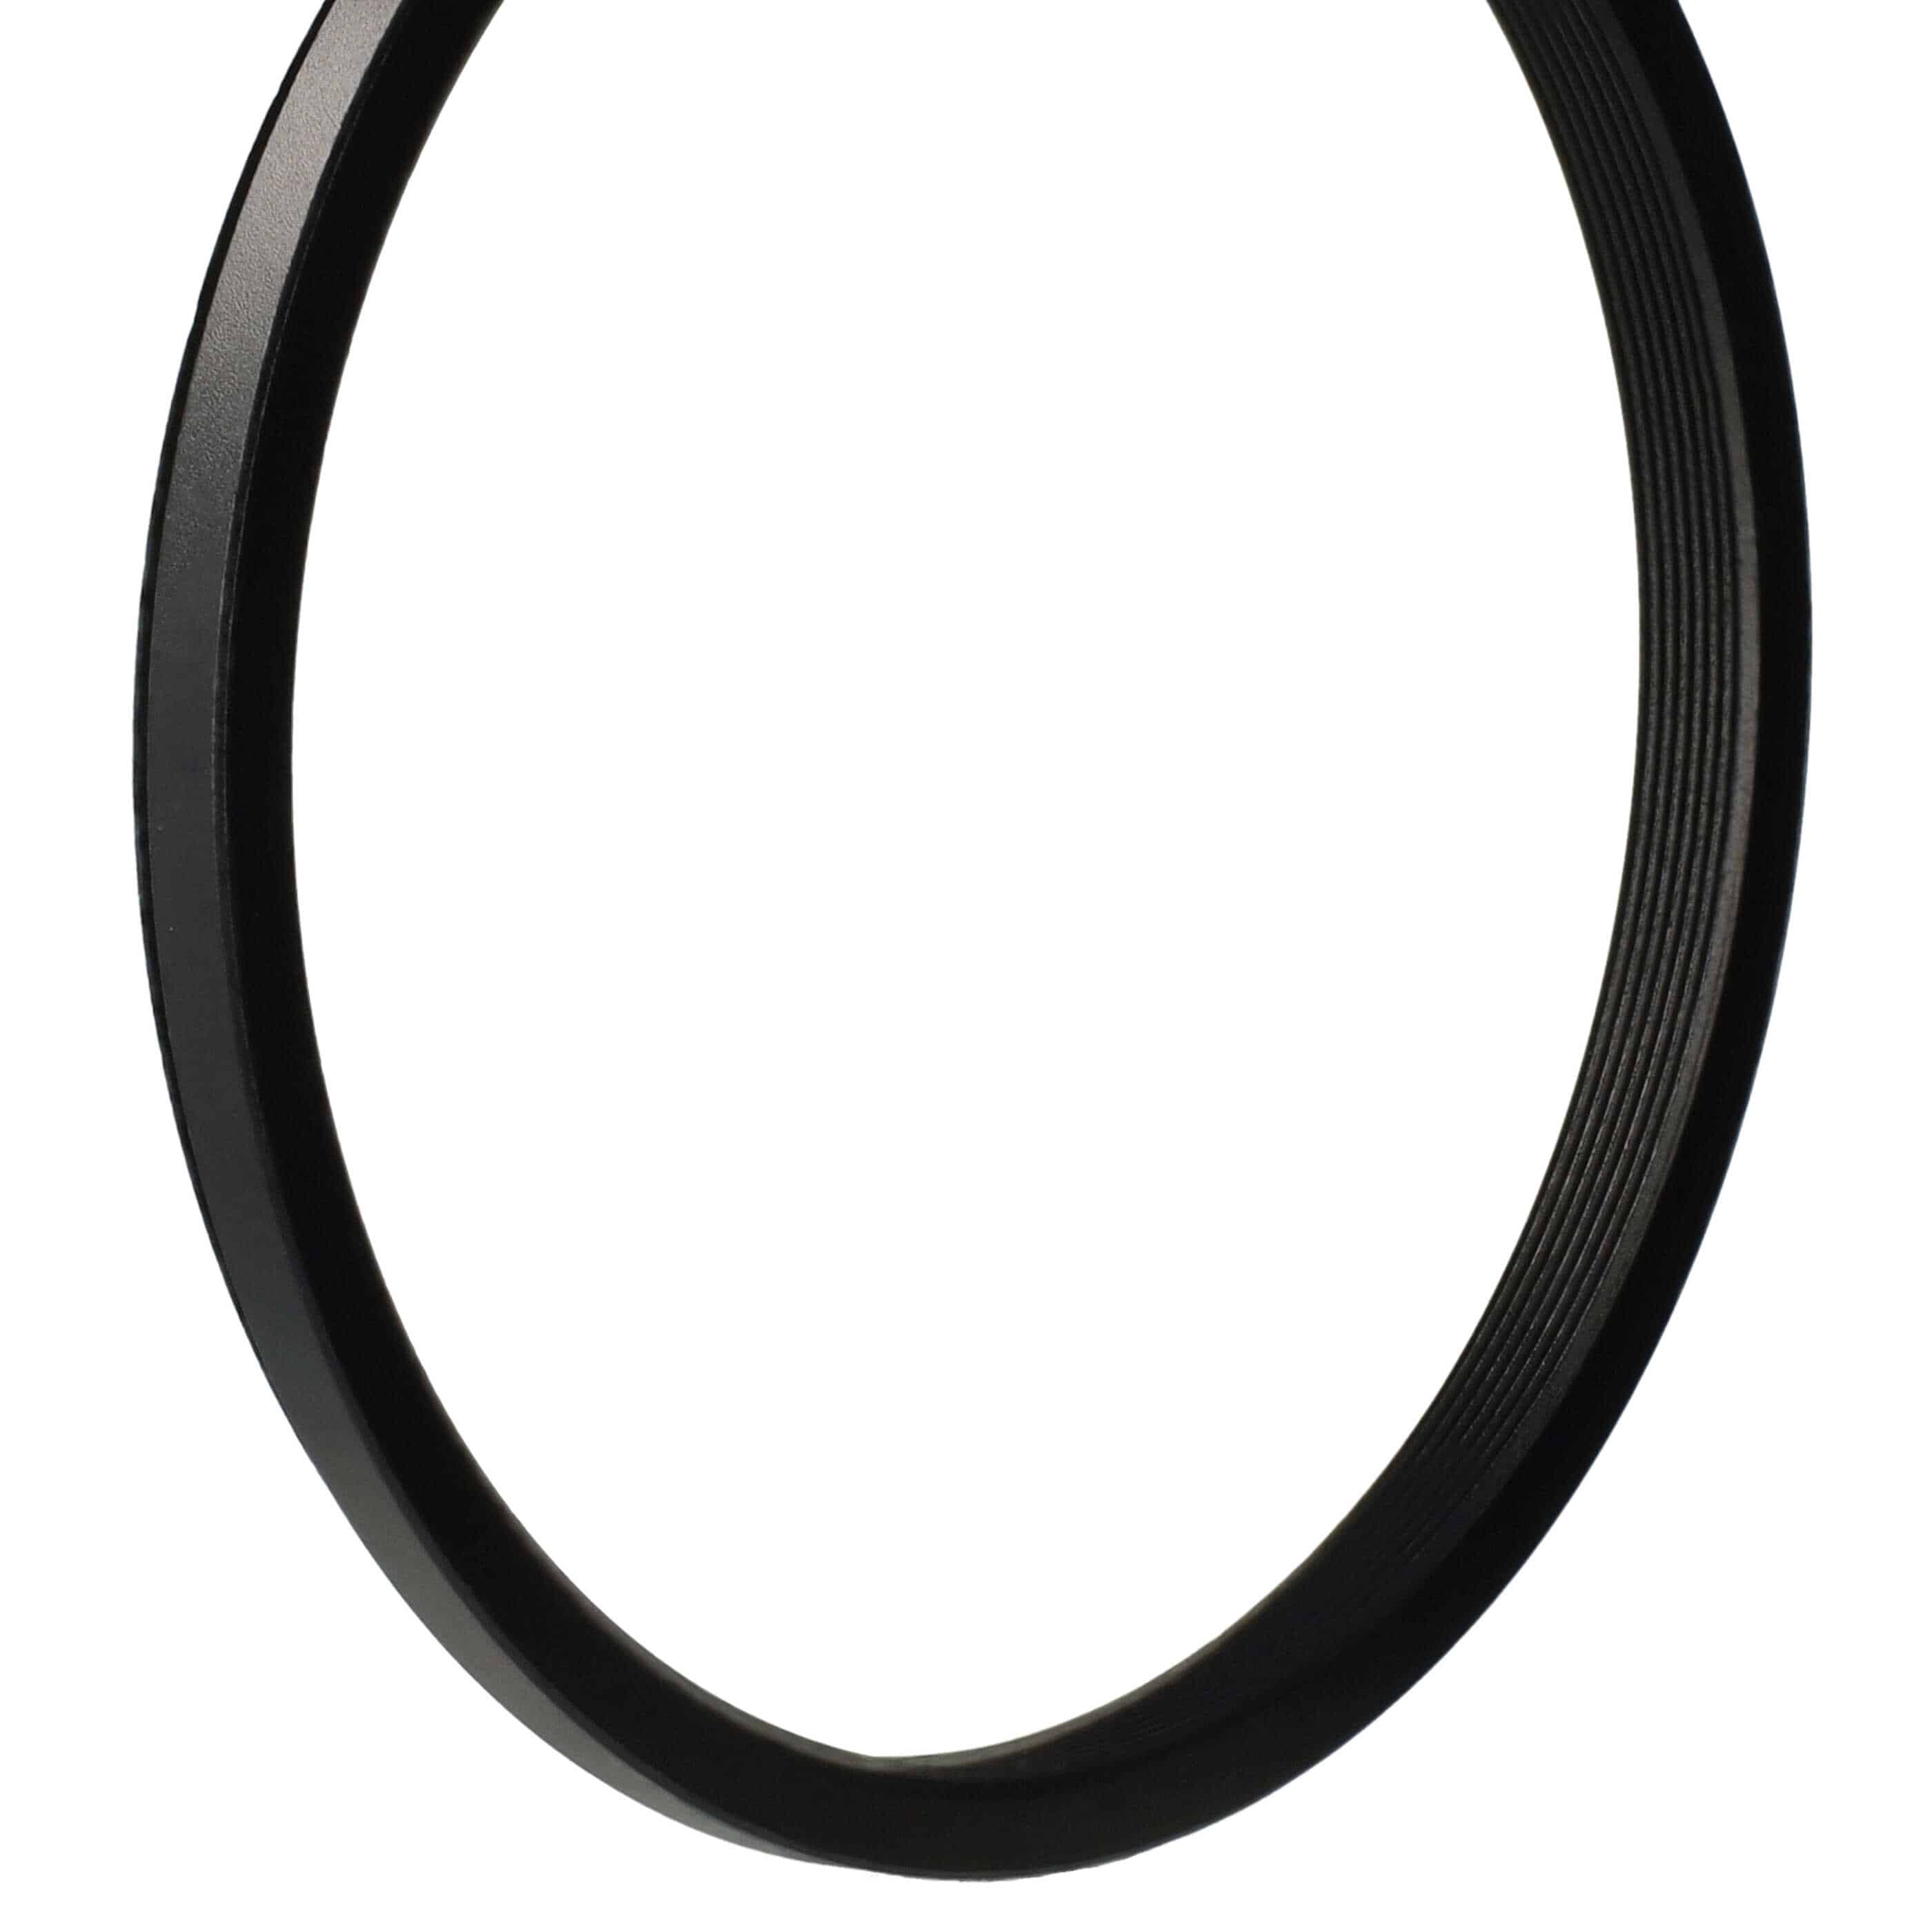 Step-Down Ring Adapter from 82 mm to 77 mm for various Camera Lenses